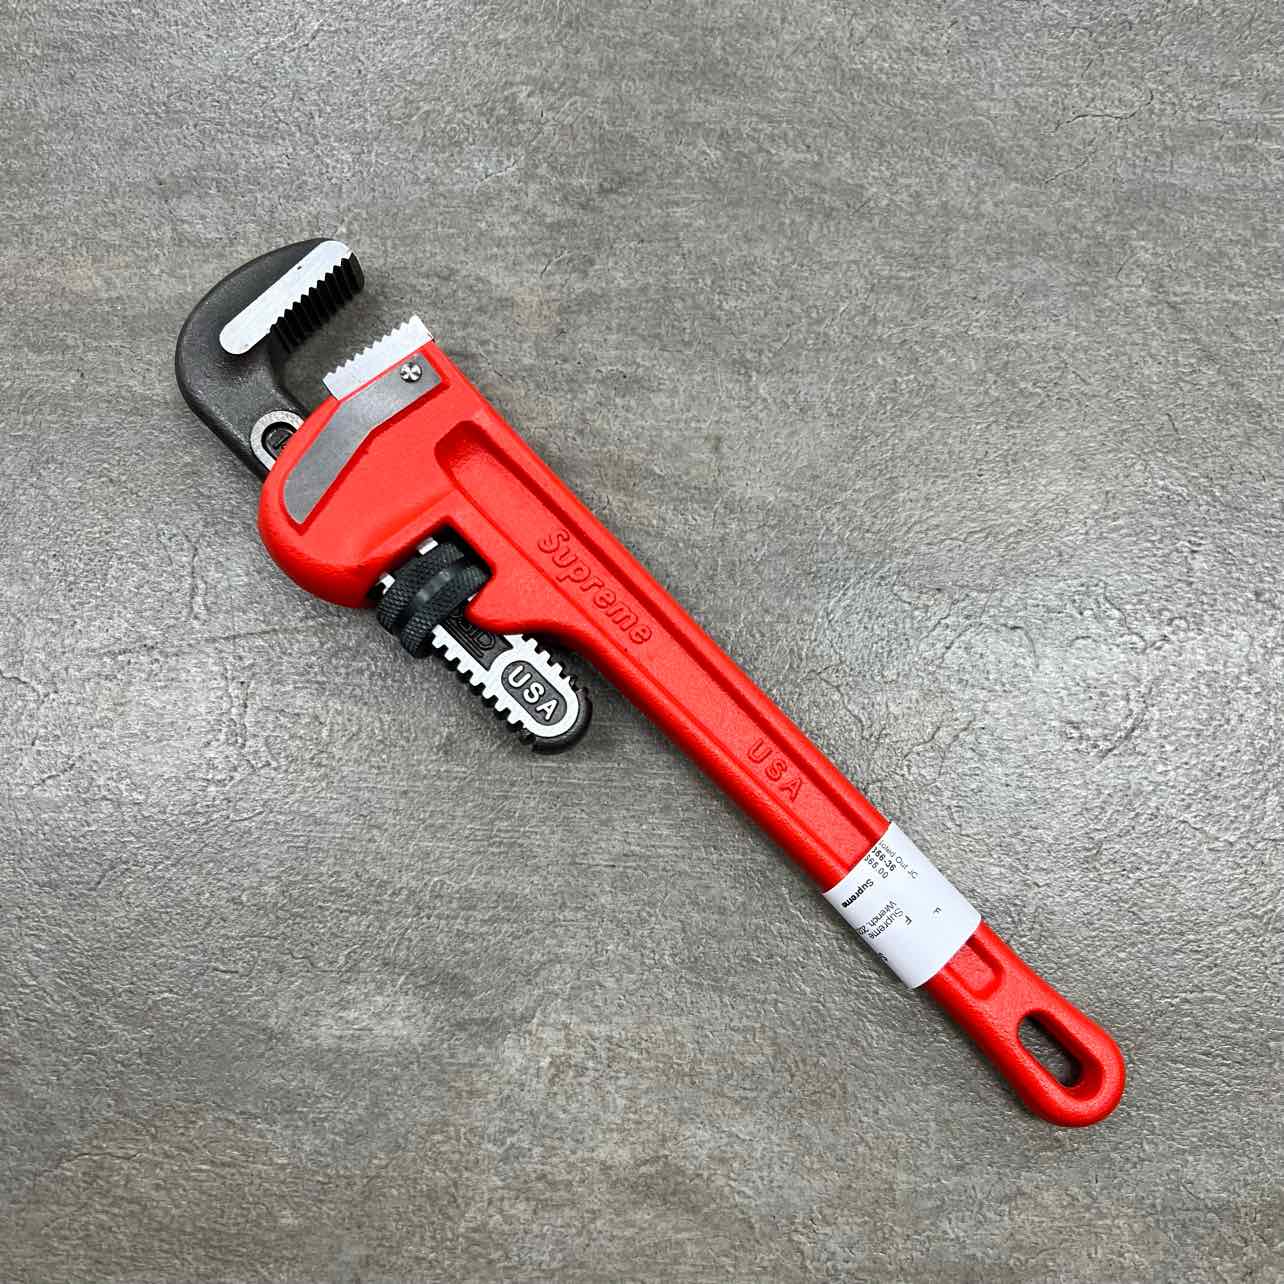 Supreme Pipe Wrench "RIDGID" 2020 New Red